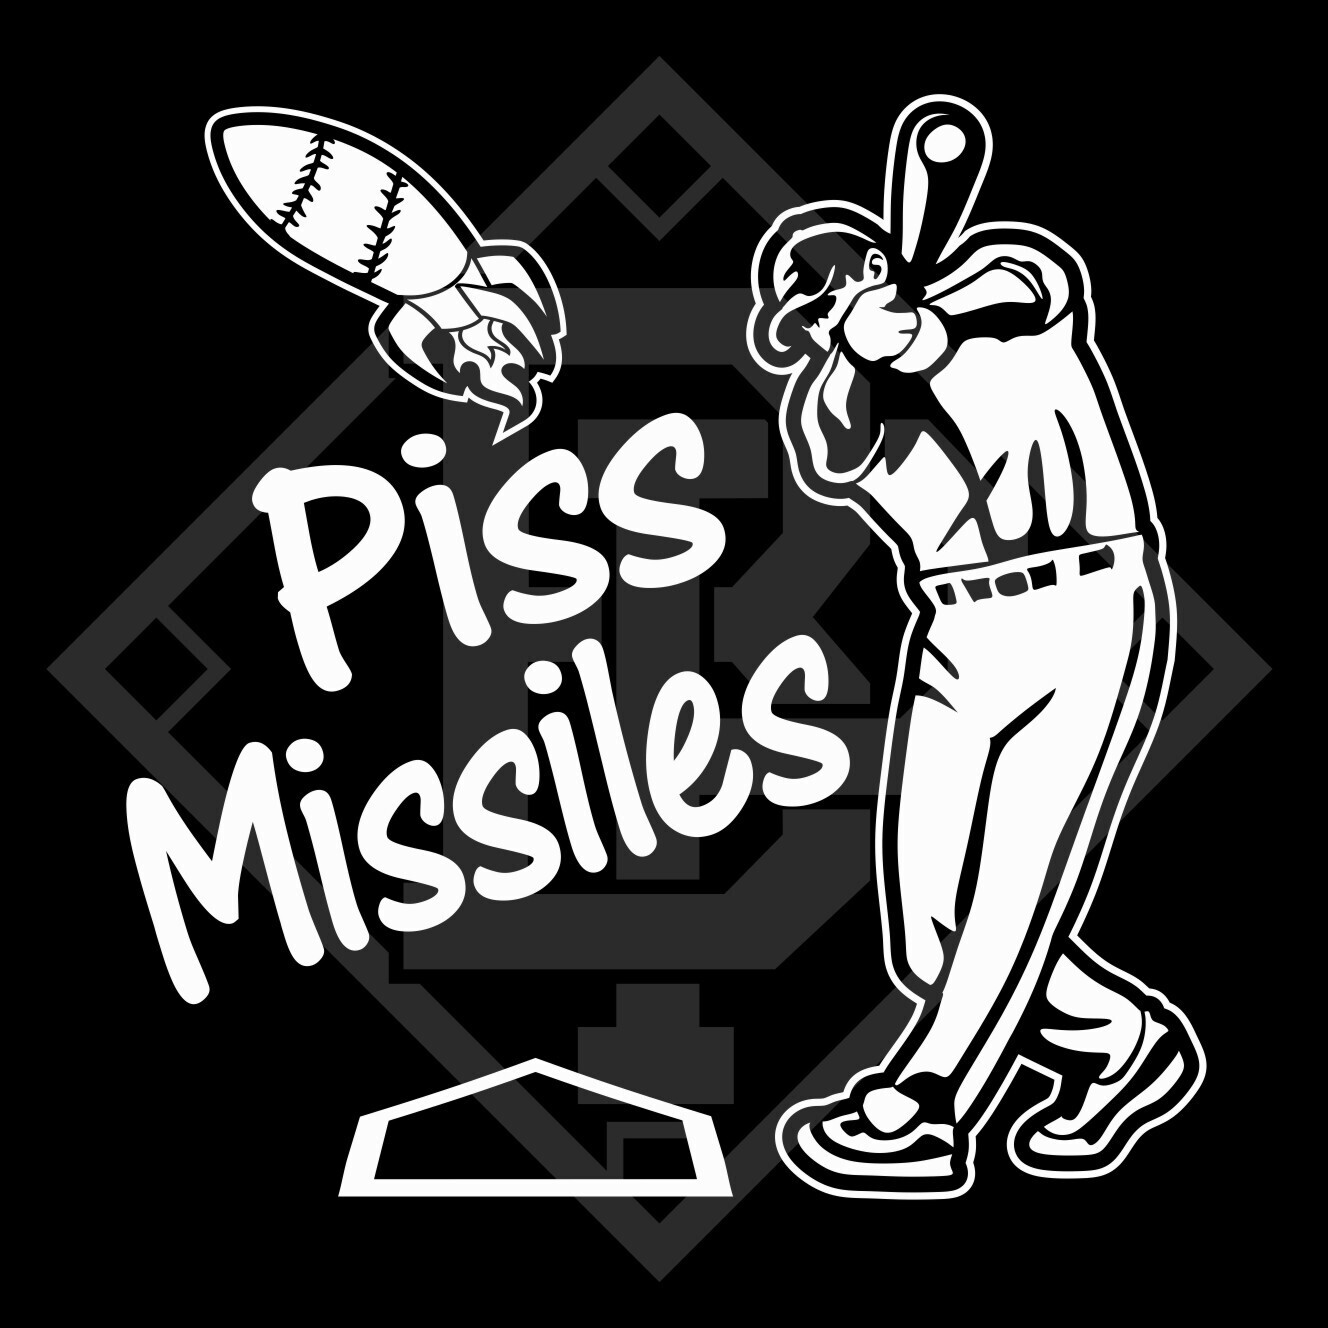 Piss Missiles